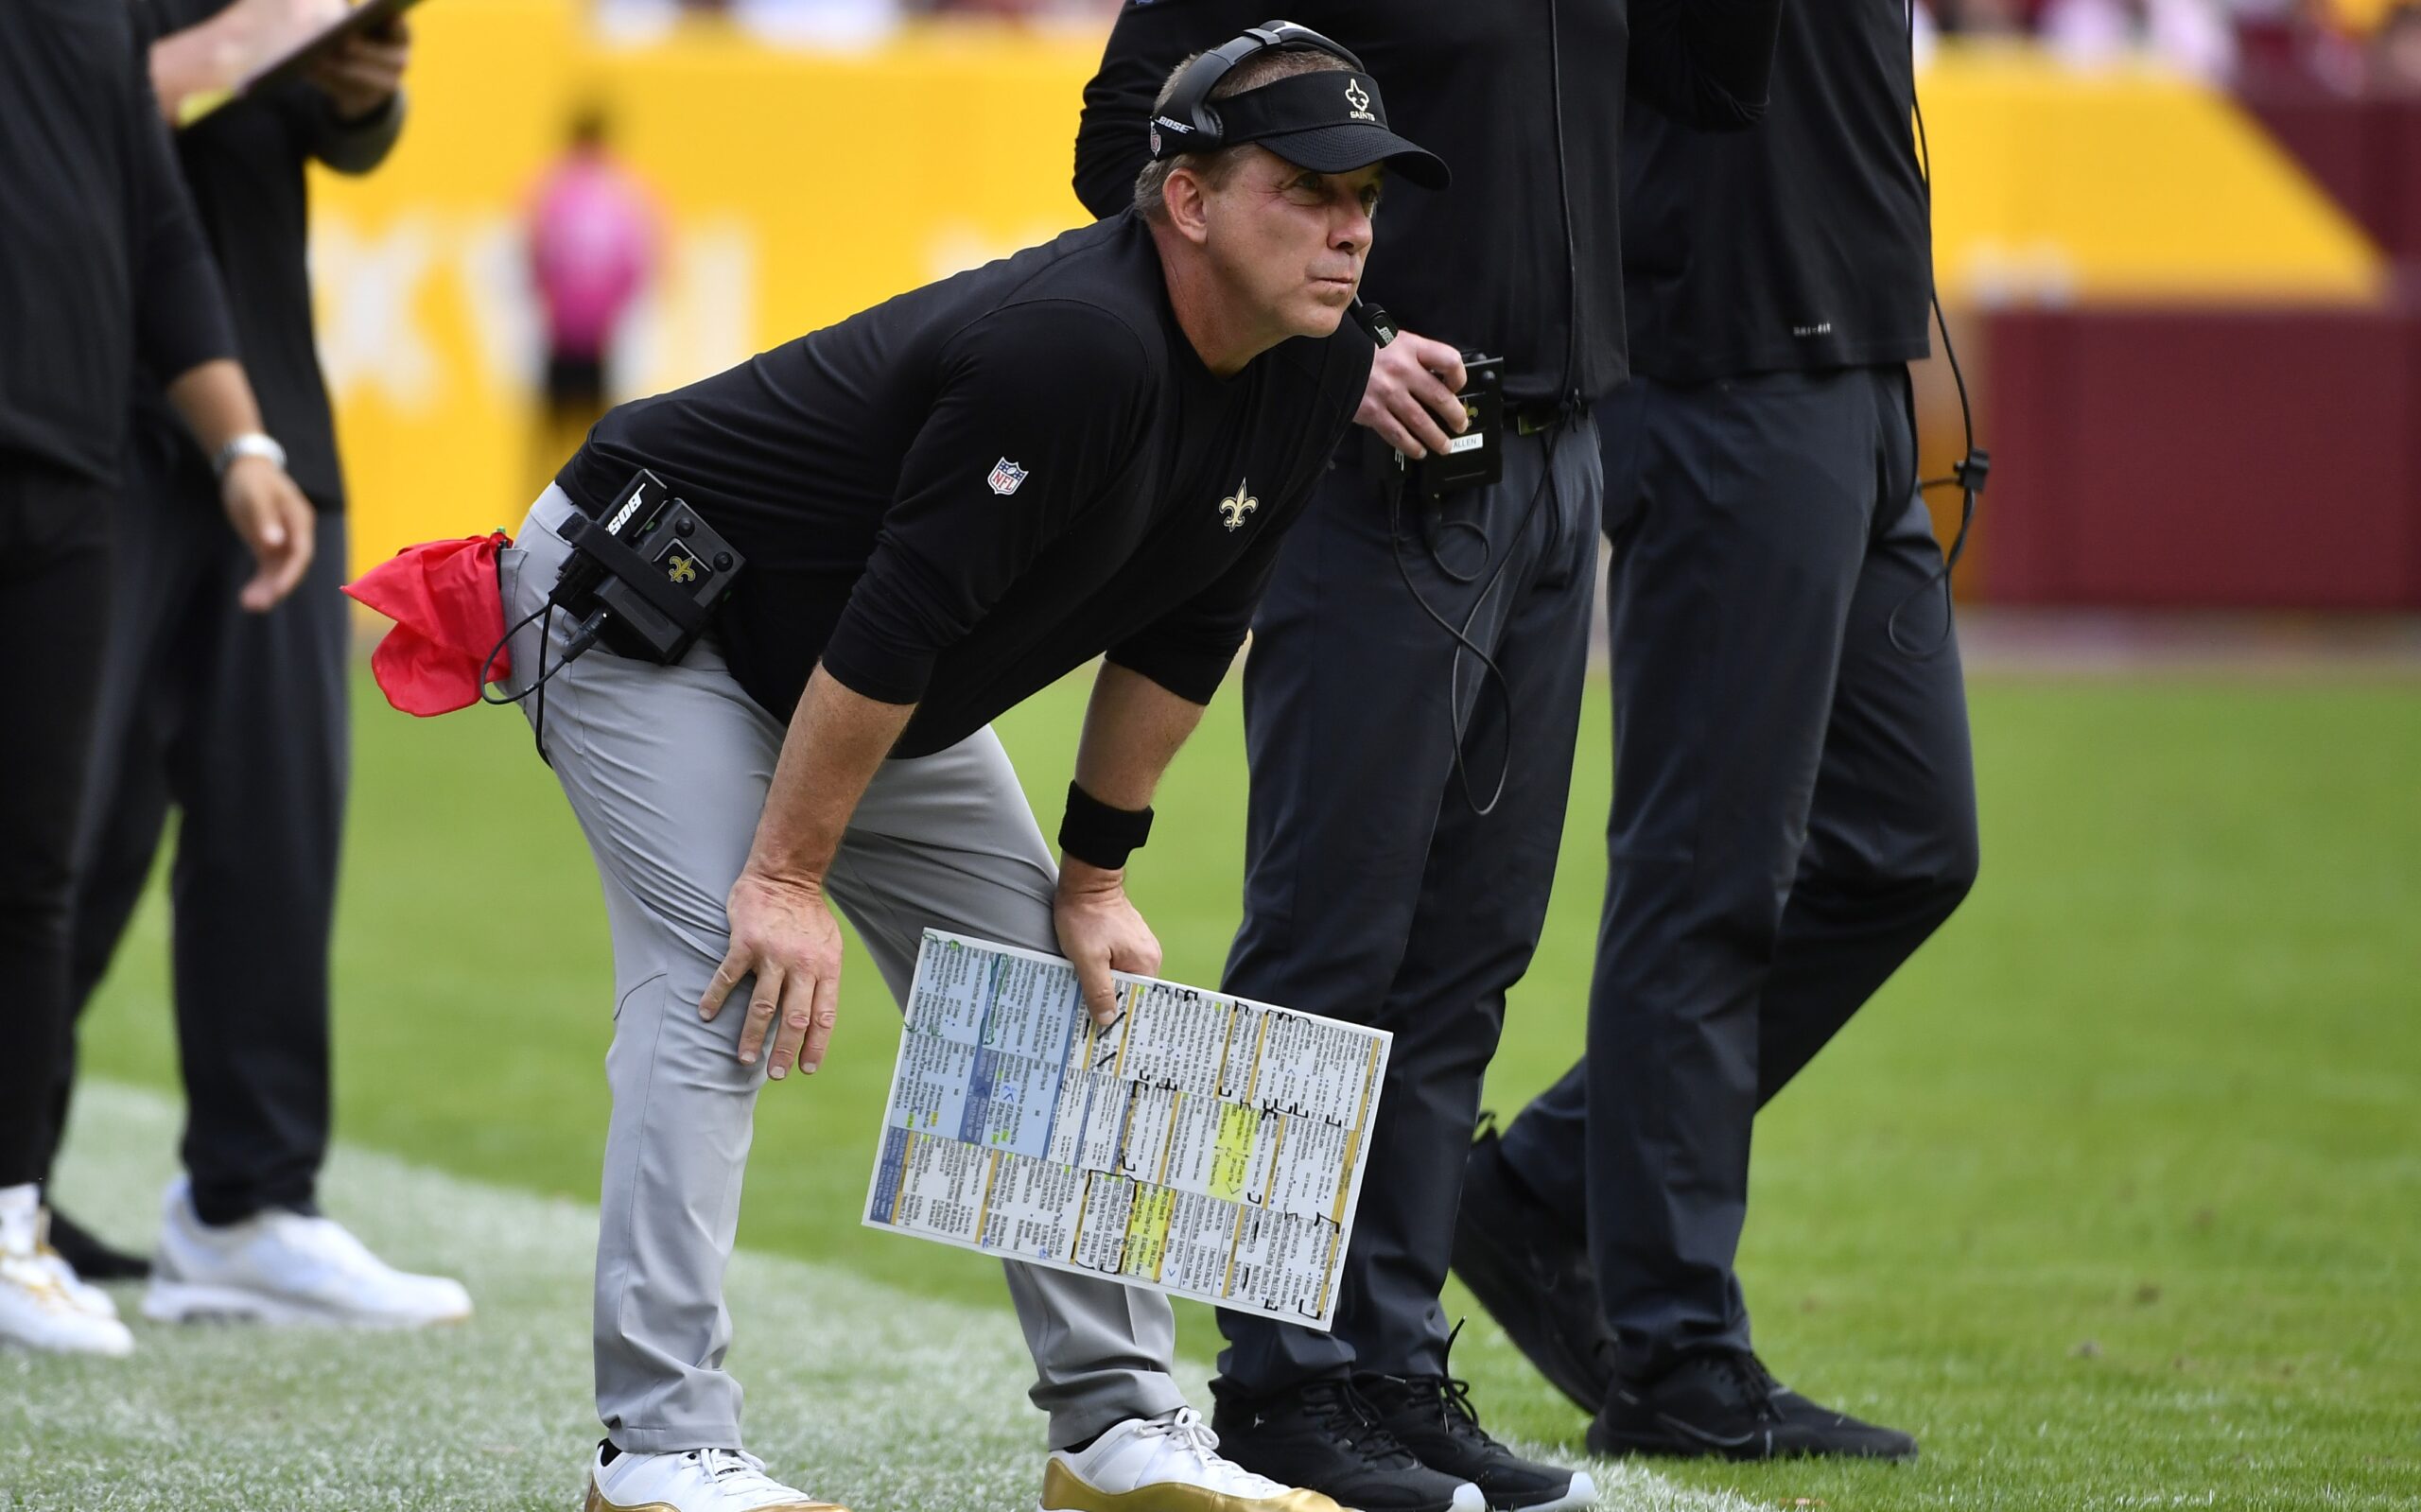 Denver has its new football coach. Can Sean Payton fix what ails